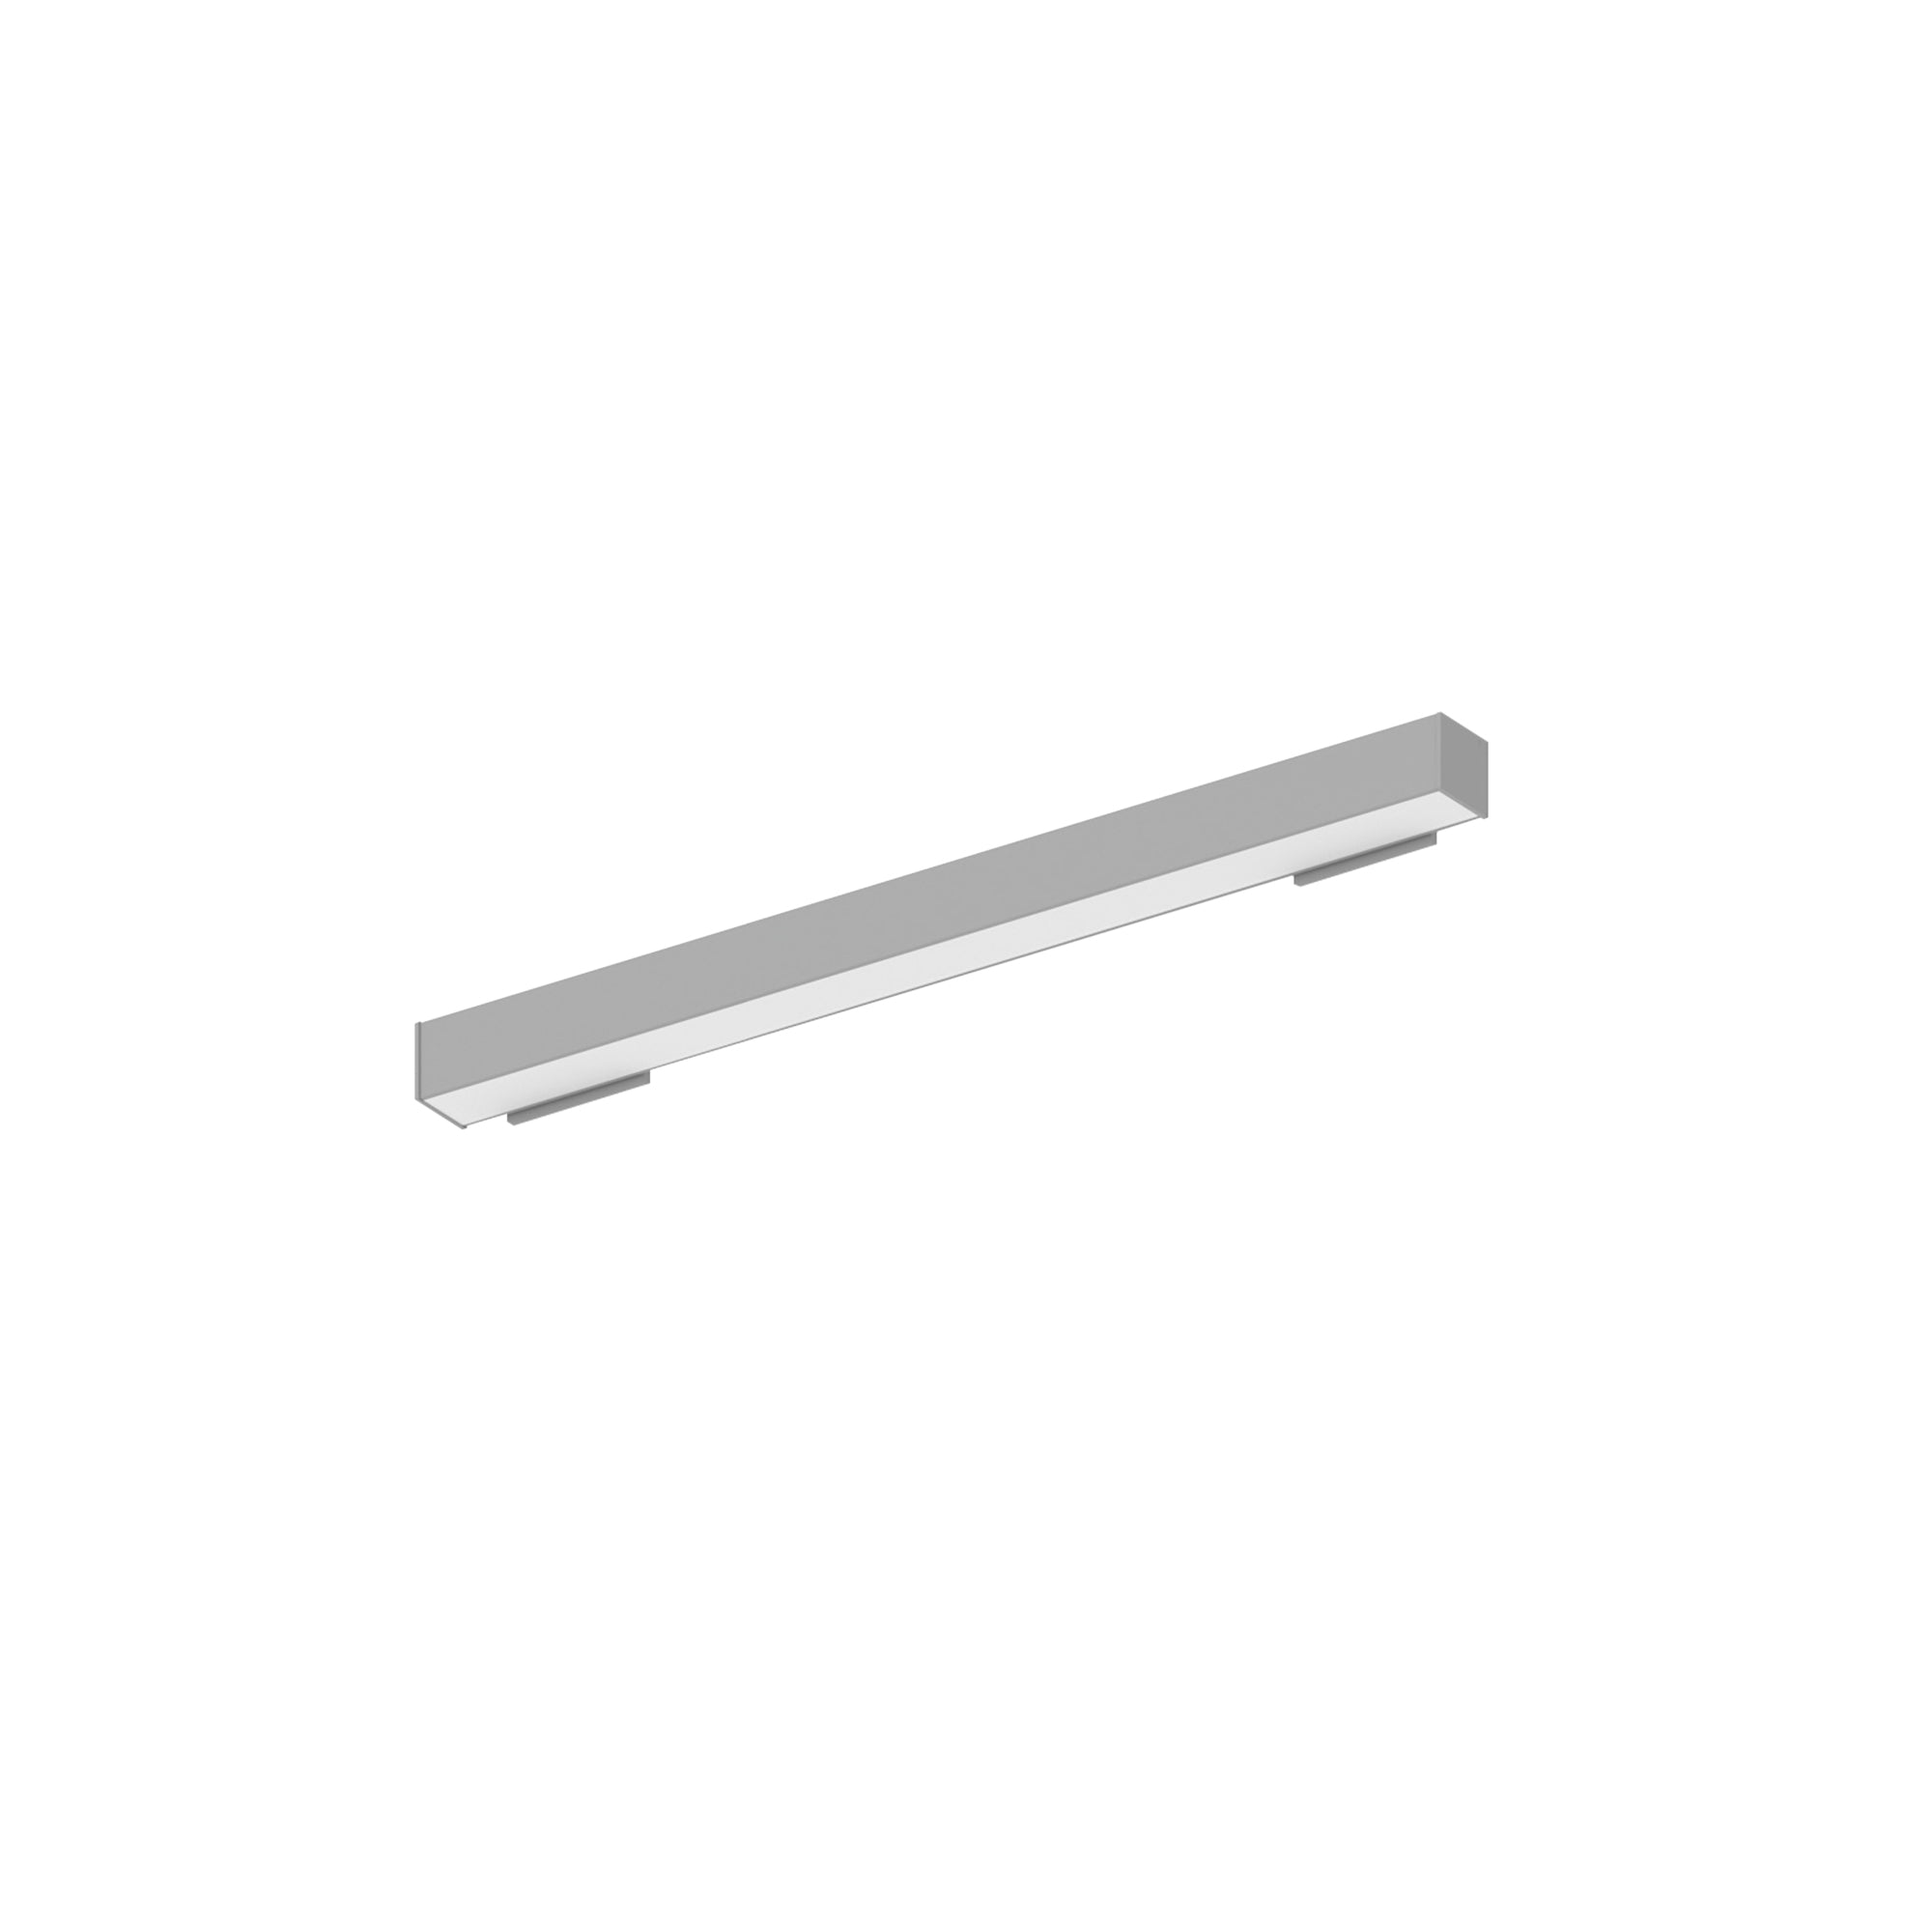 Nora Lighting NWLIN-21035A/L2-R2 - Linear - 2' L-Line LED Wall Mount Linear, 2100lm / 3500K, 2 Inchx4 Inch Left Plate & 2 Inchx4 Inch Right Plate, Aluminum Finish